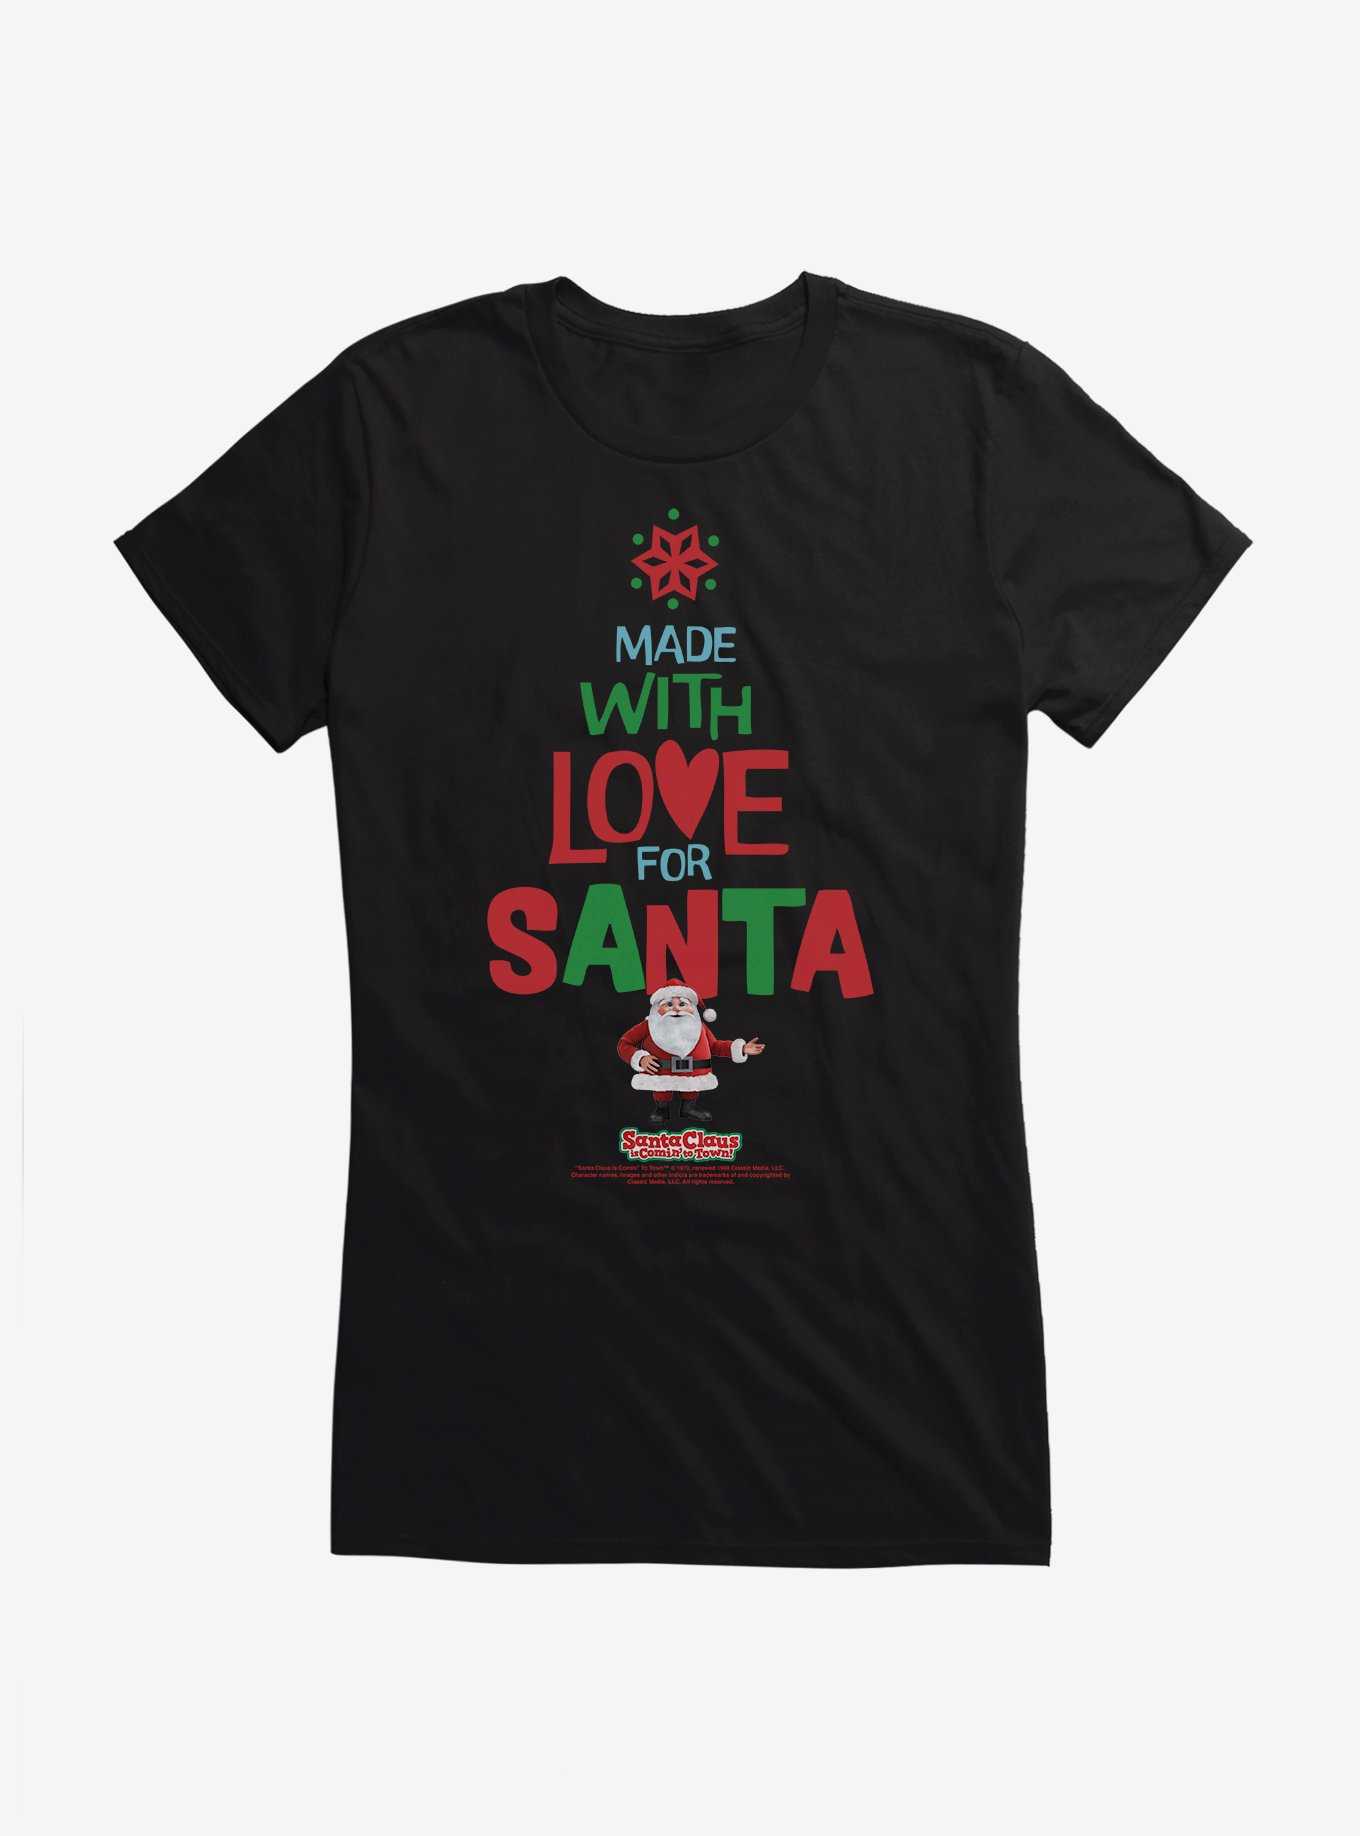 Santa Claus Is Comin' To Town! Made With Love For Santa Girls T-Shirt, , hi-res